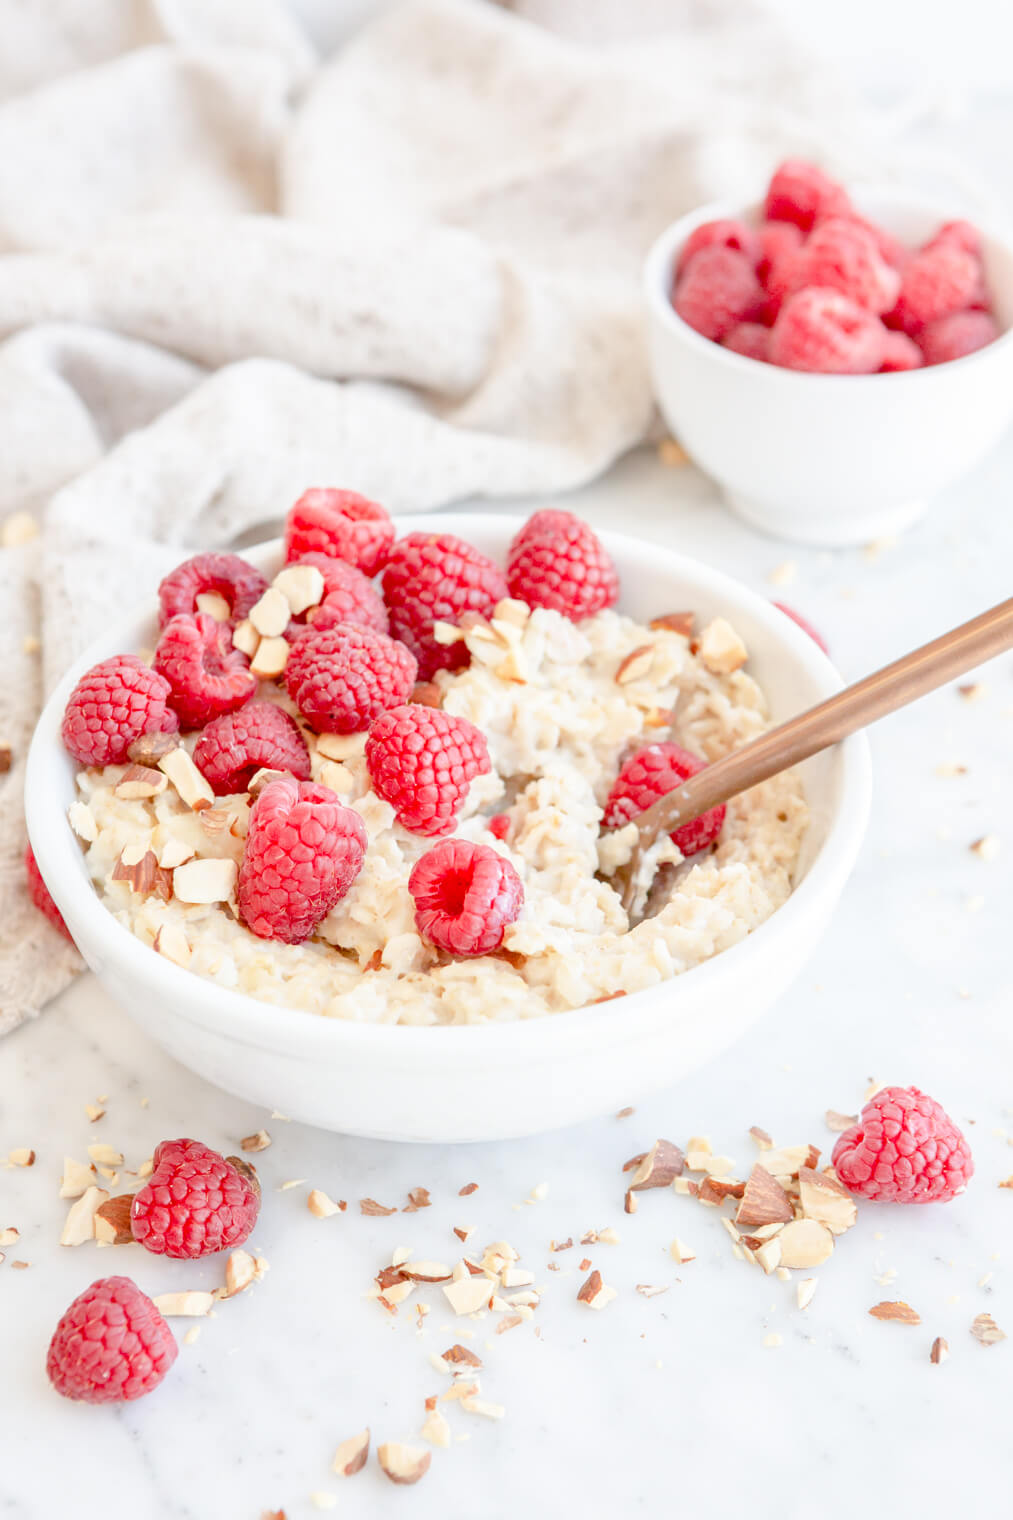 Oatmeal in a white bowl topped with chopped almonds and raspberries with a small white bowl of raspberries and a beige linen in the background.